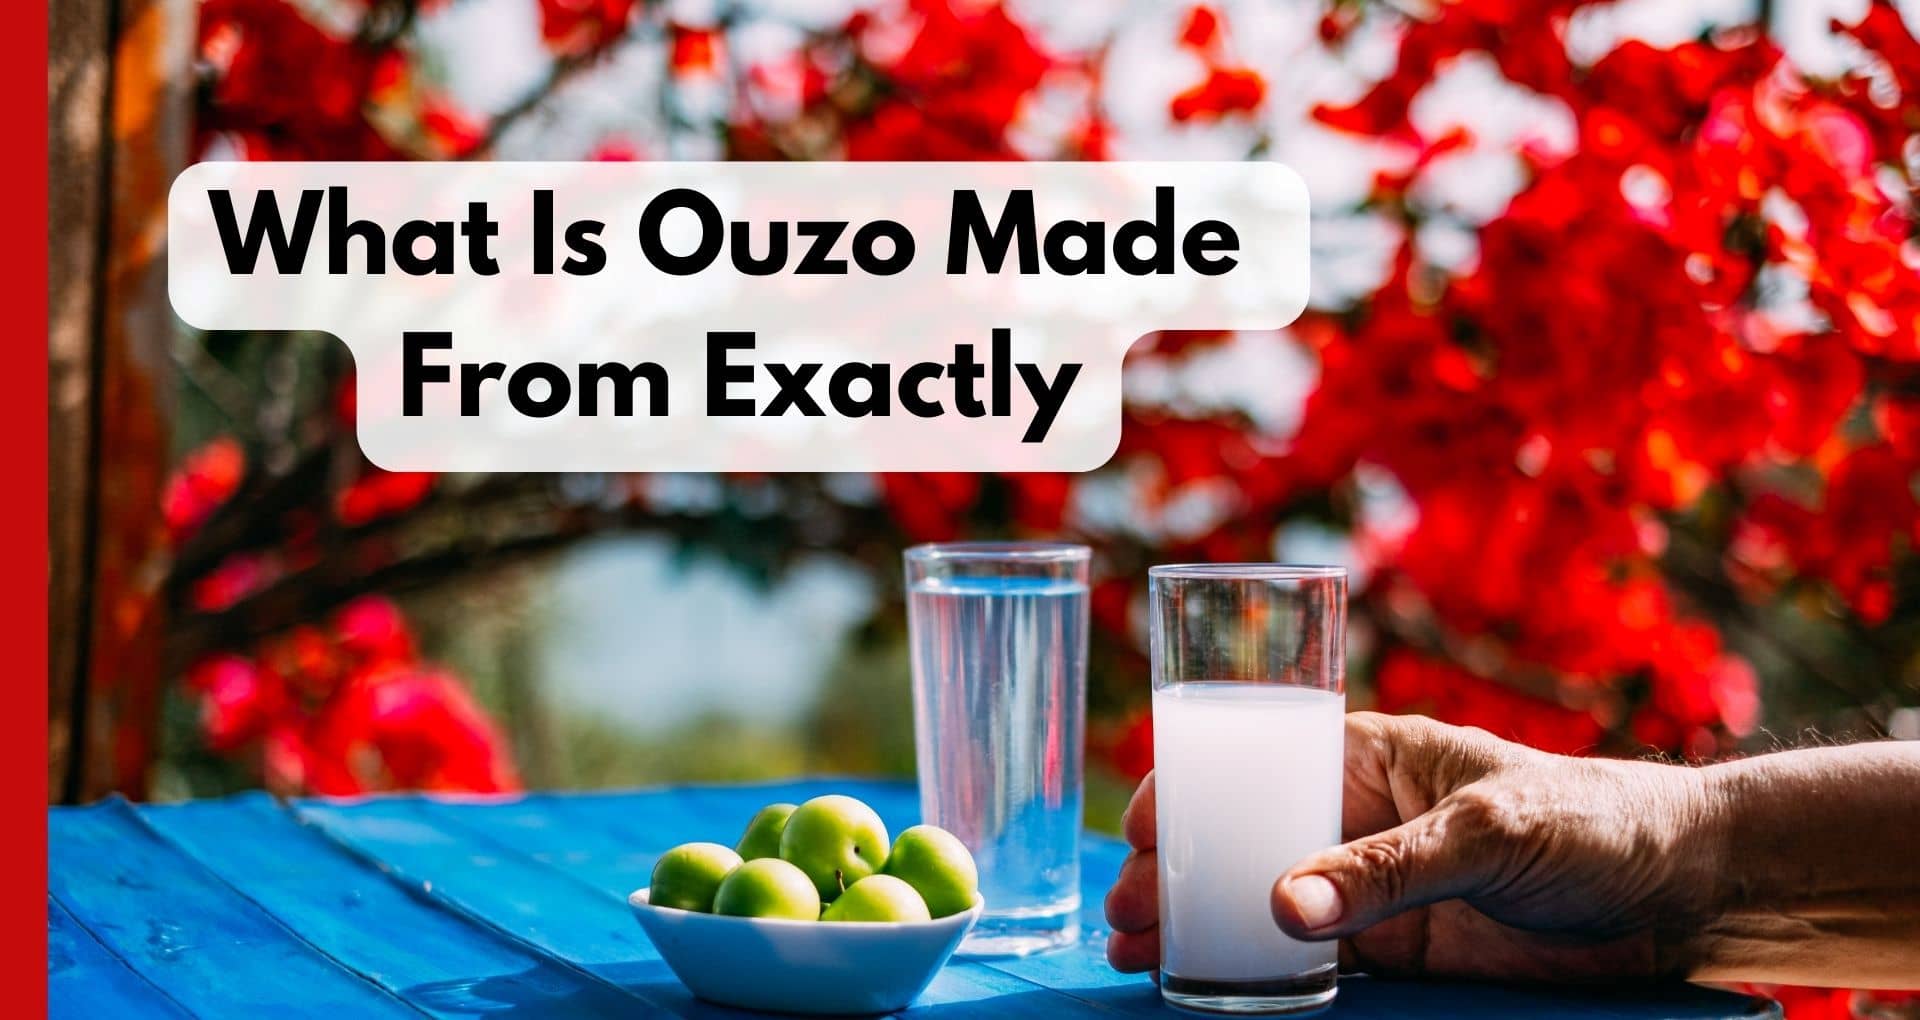 What Is Ouzo Made From Exactly?